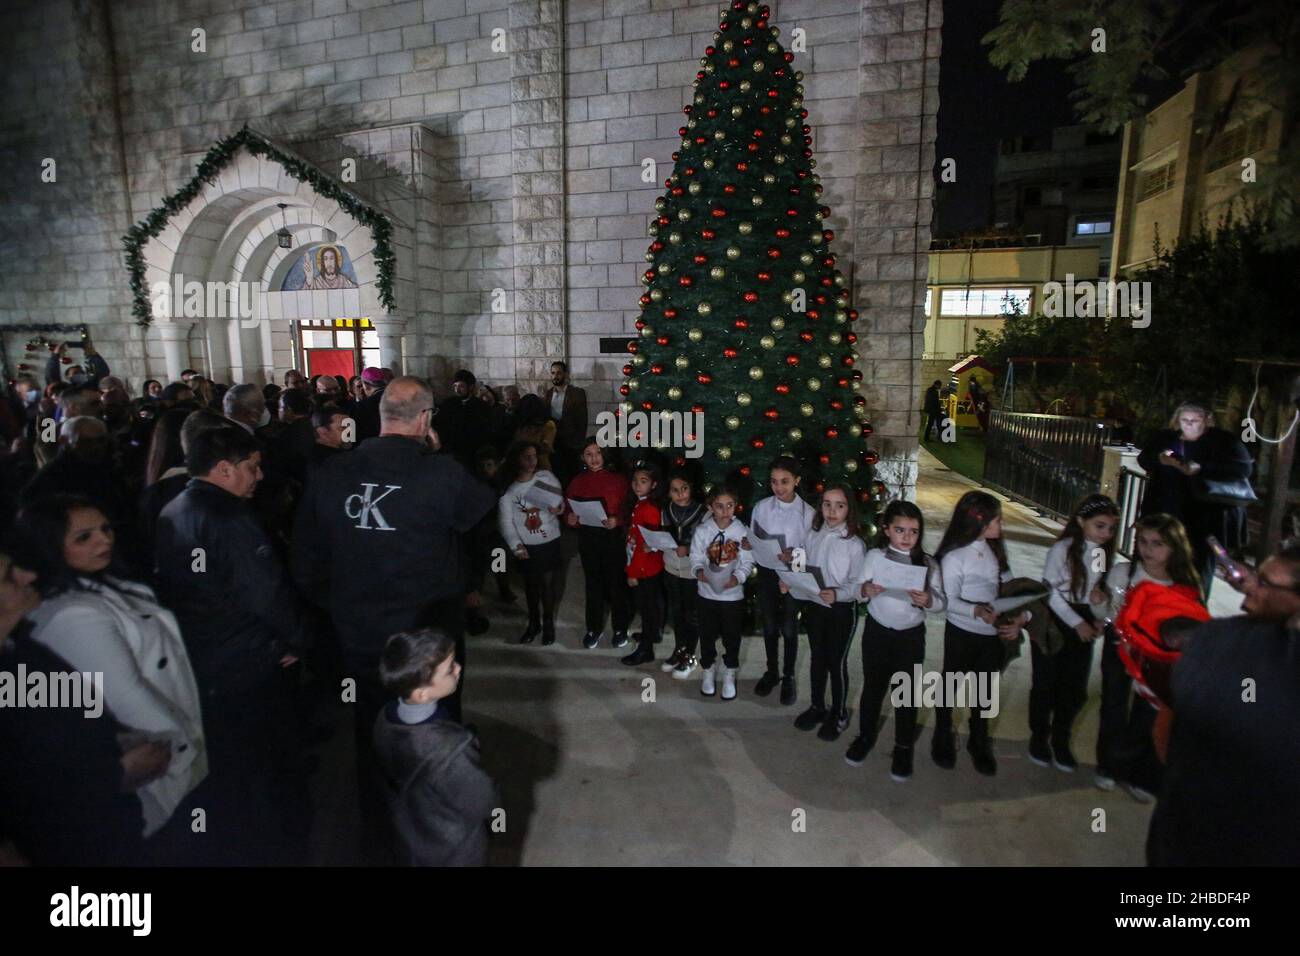 Palestinian Christian worshipers in the Roman Catholic Holy Family Church during the start of the Christmas holiday, in Gaza City, on Dec 18, 2021. Stock Photo